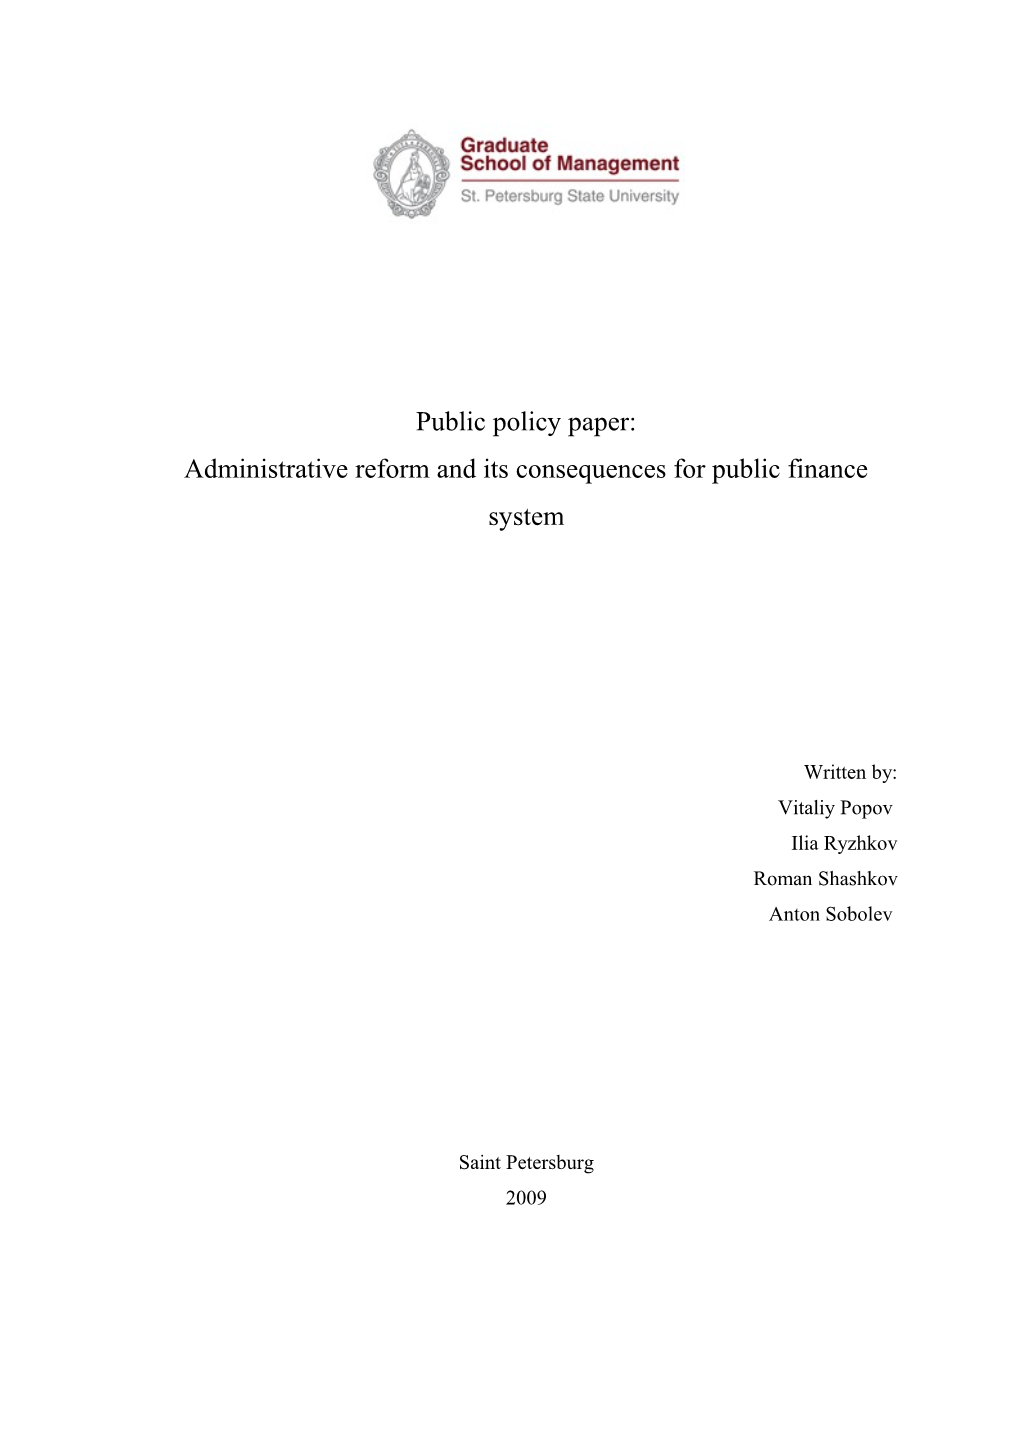 Administrative Reform and Its Consequences for Public Finance System